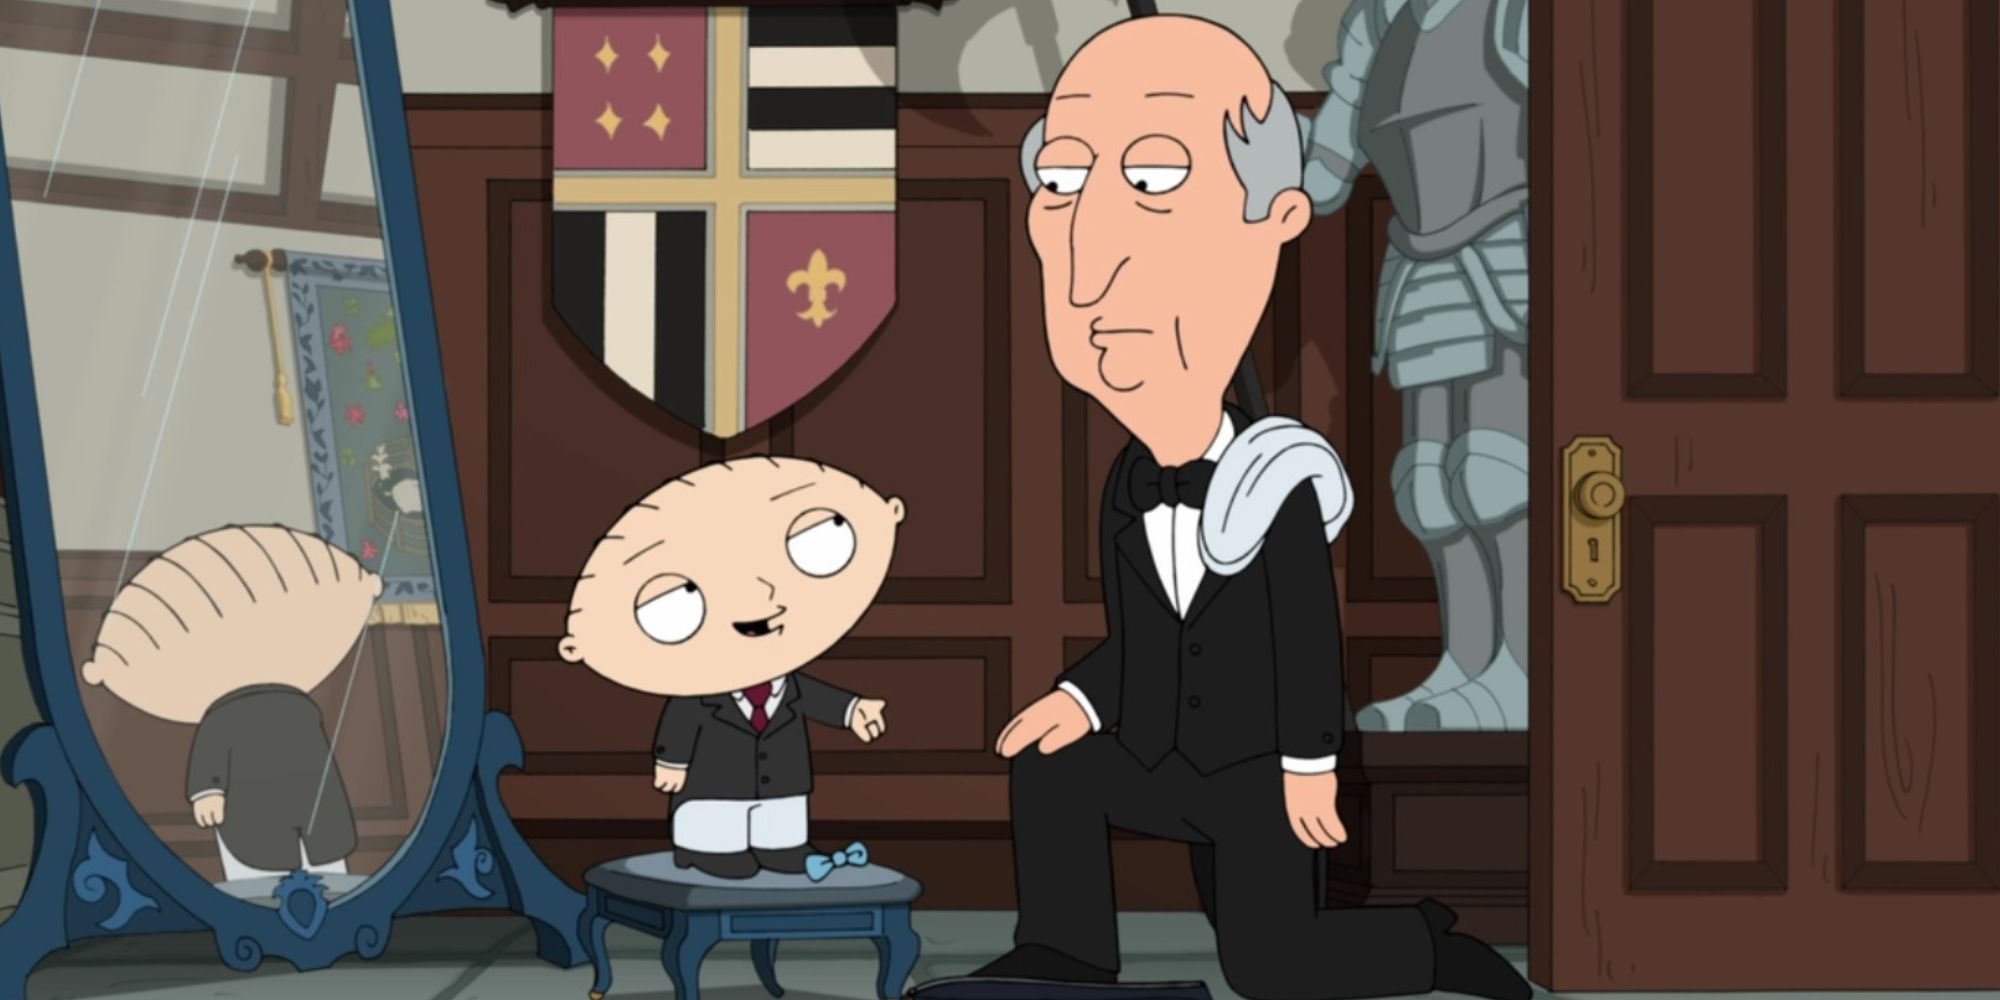 Stewie Griffin standing on a stool in front of a mirror while speaking to a man kneeling down next to him in Family Guy